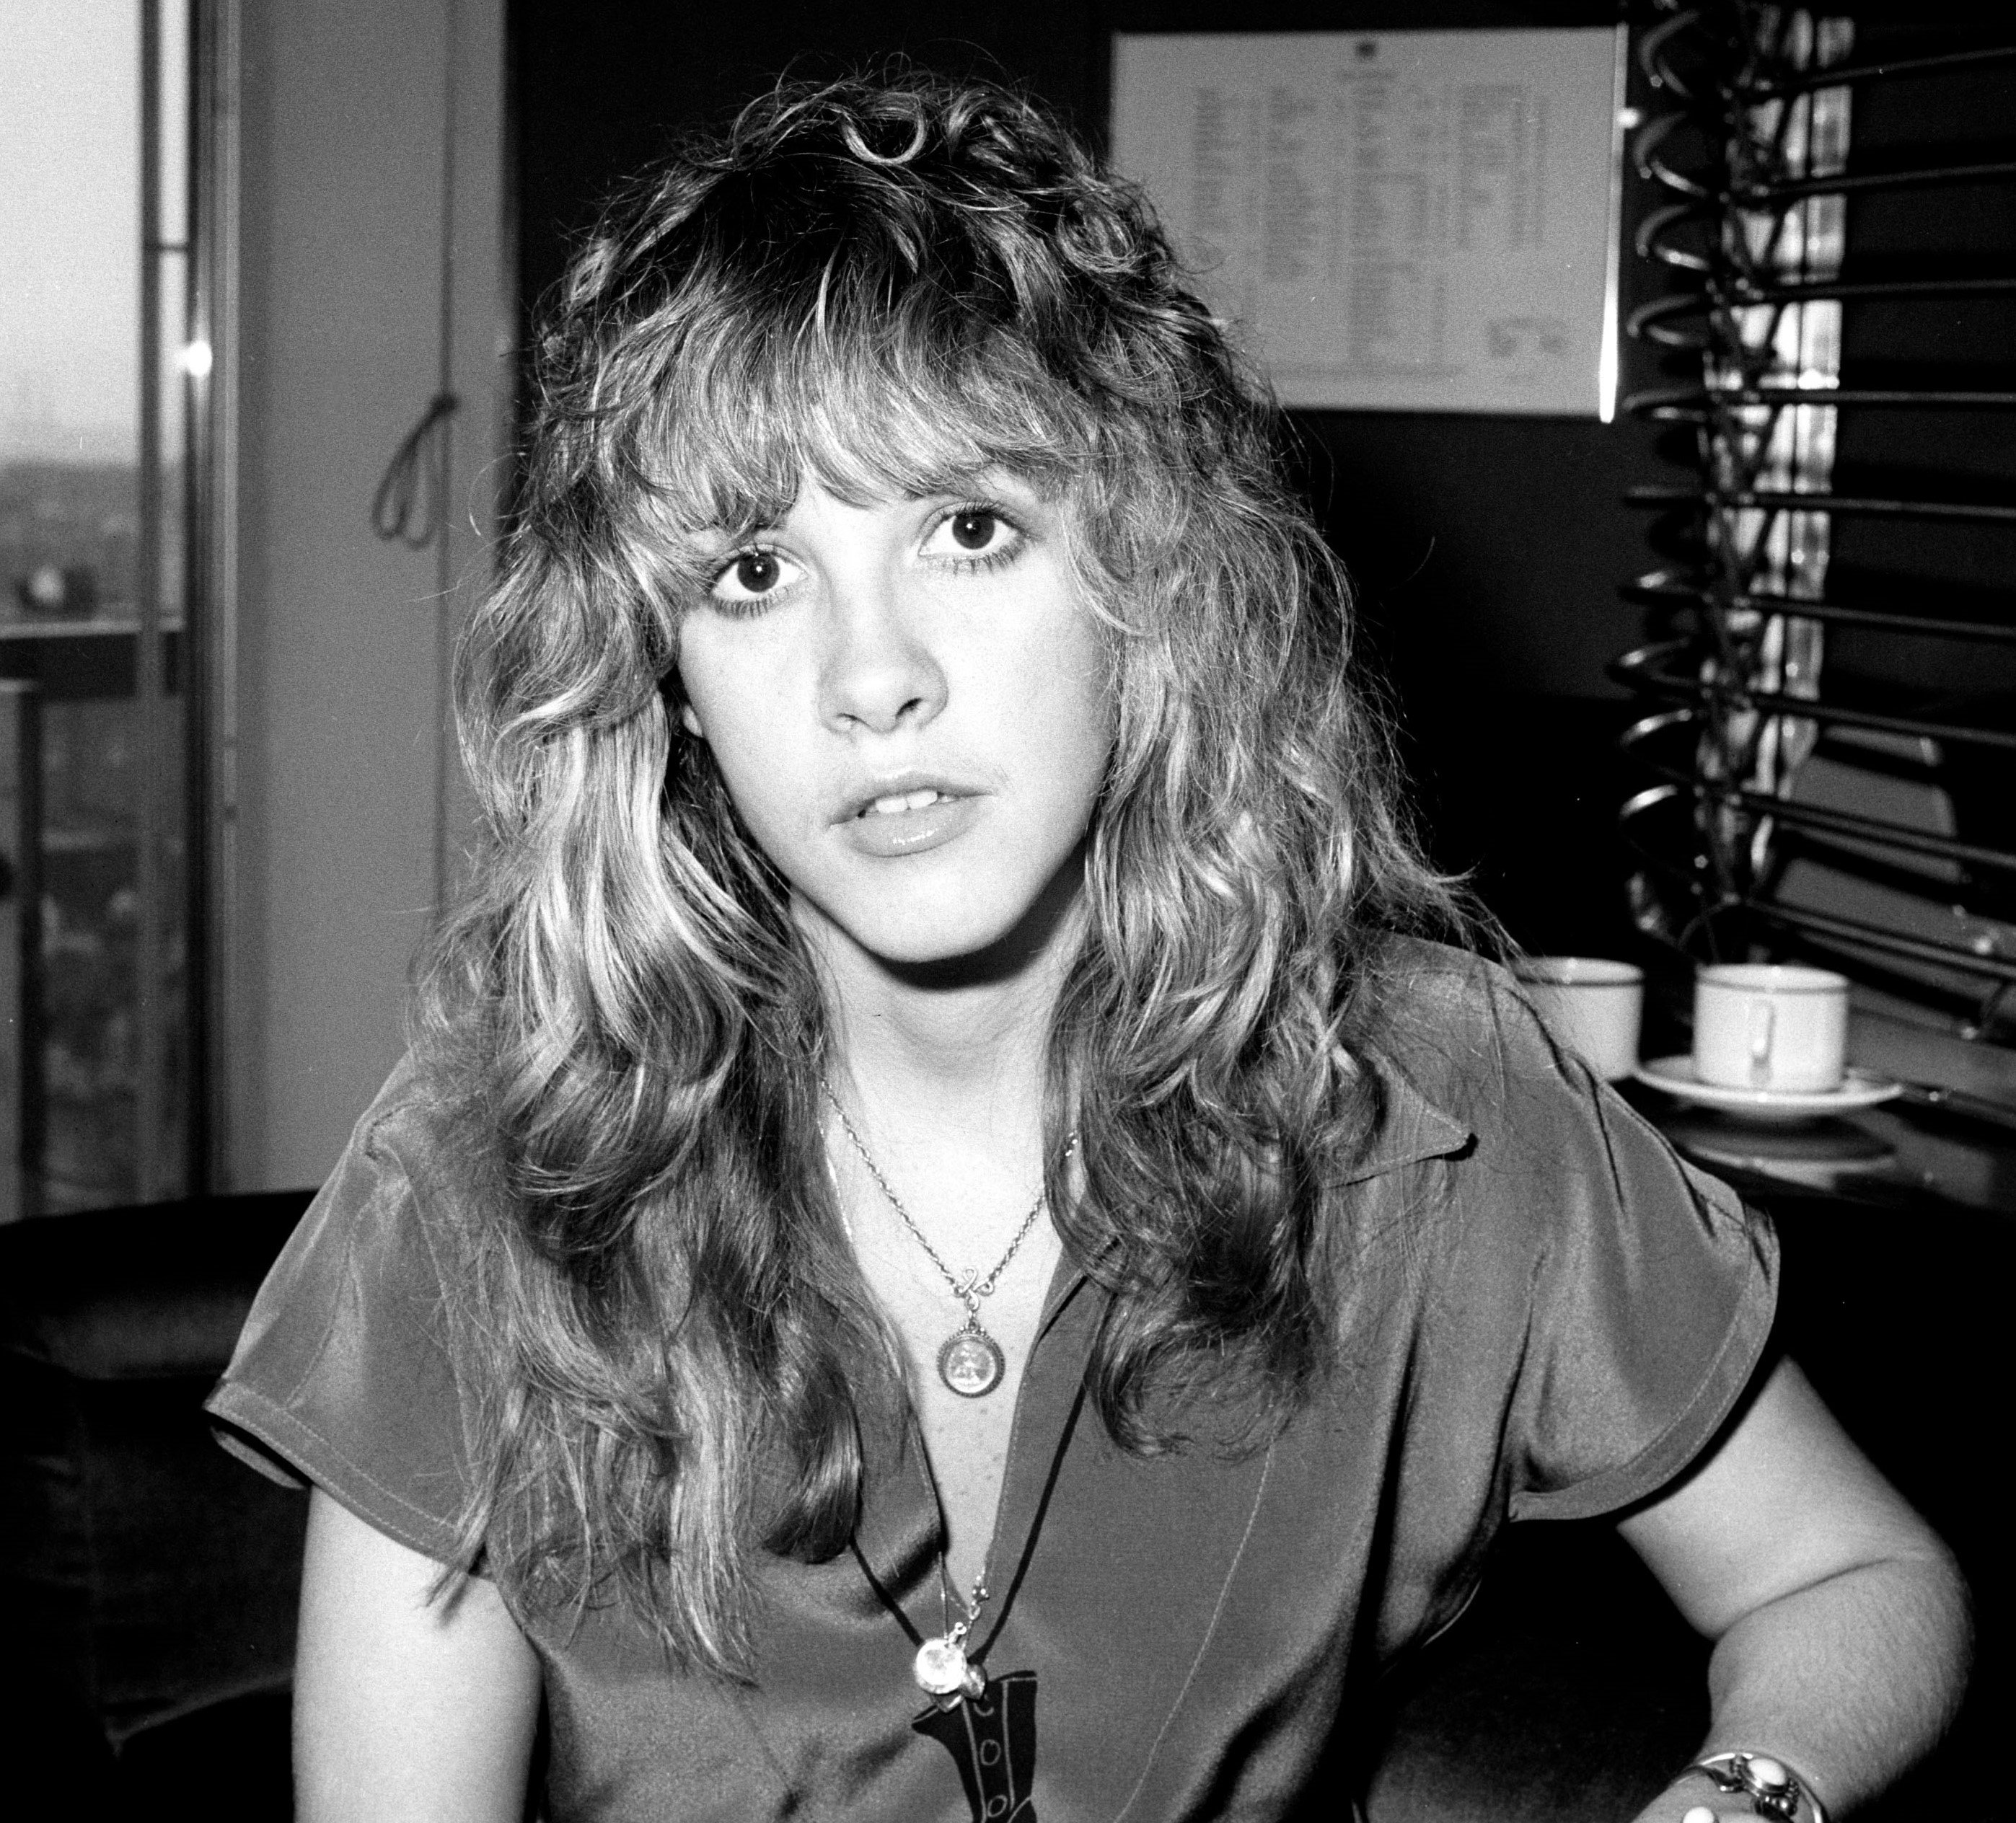 A black and white image of Stevie Nicks seated by a window and a table.